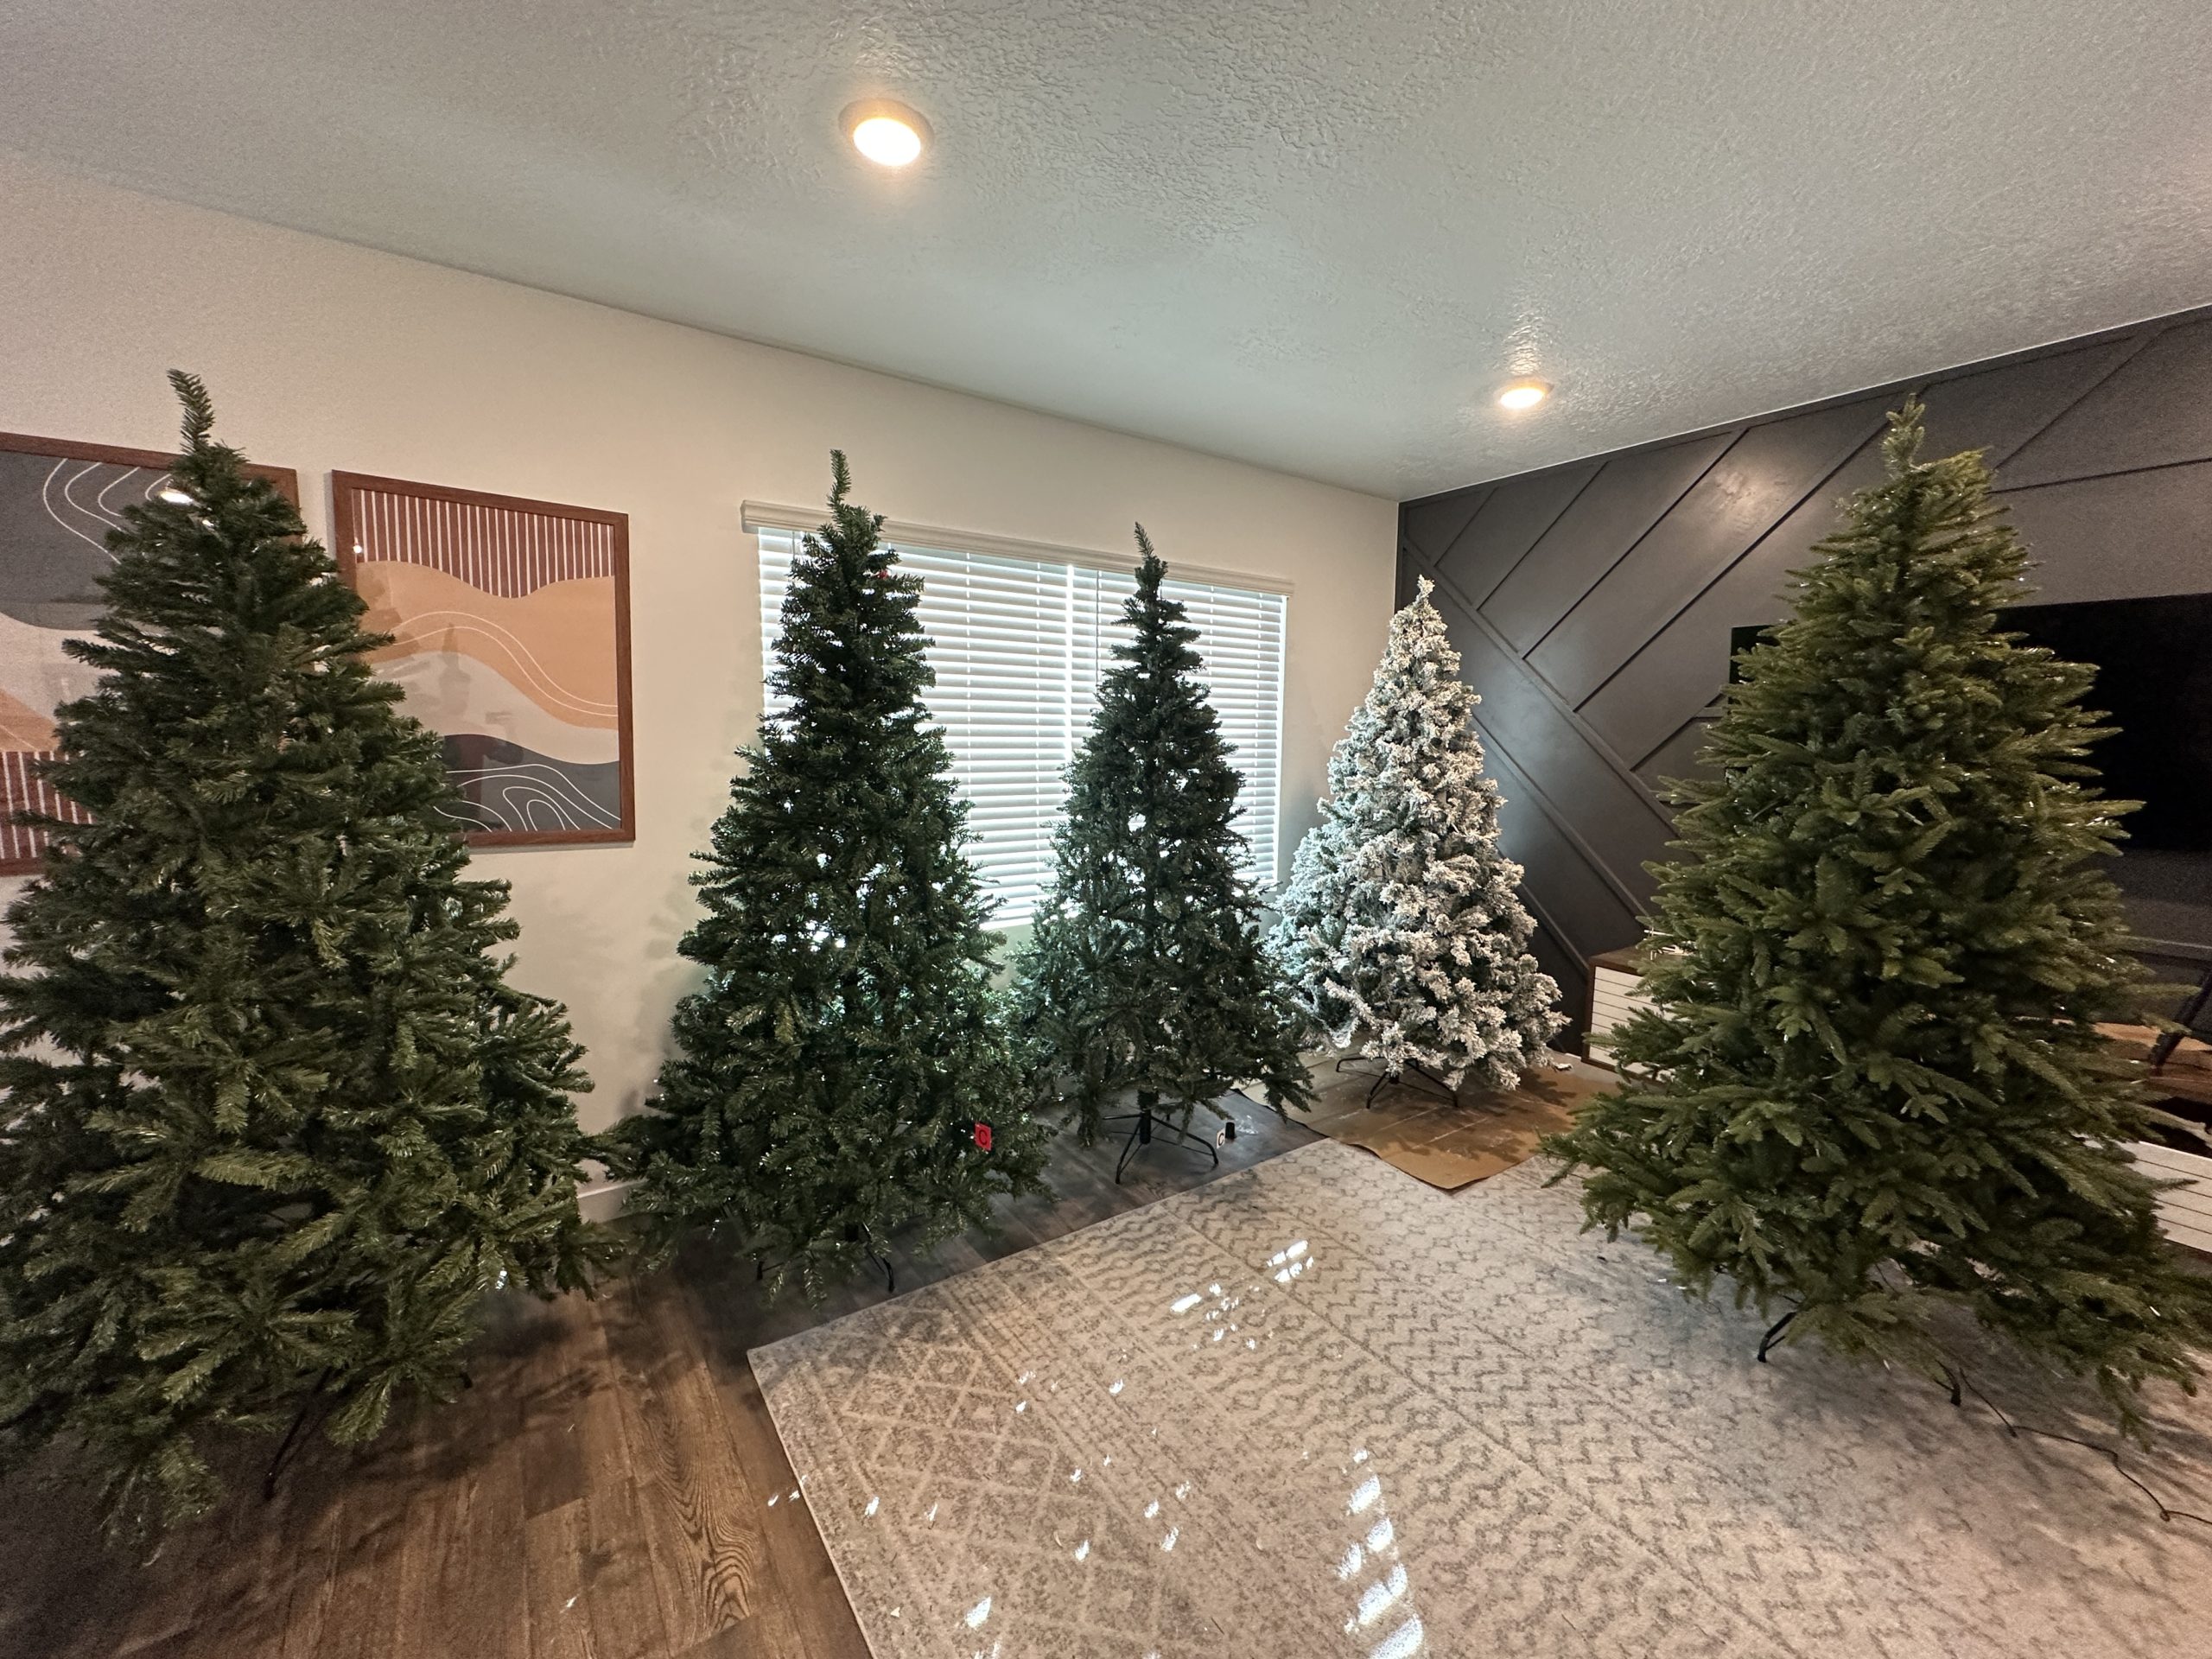 I Bought 5 Highly Rated Artificial Christmas Trees On Amazon – Here Is The Best One